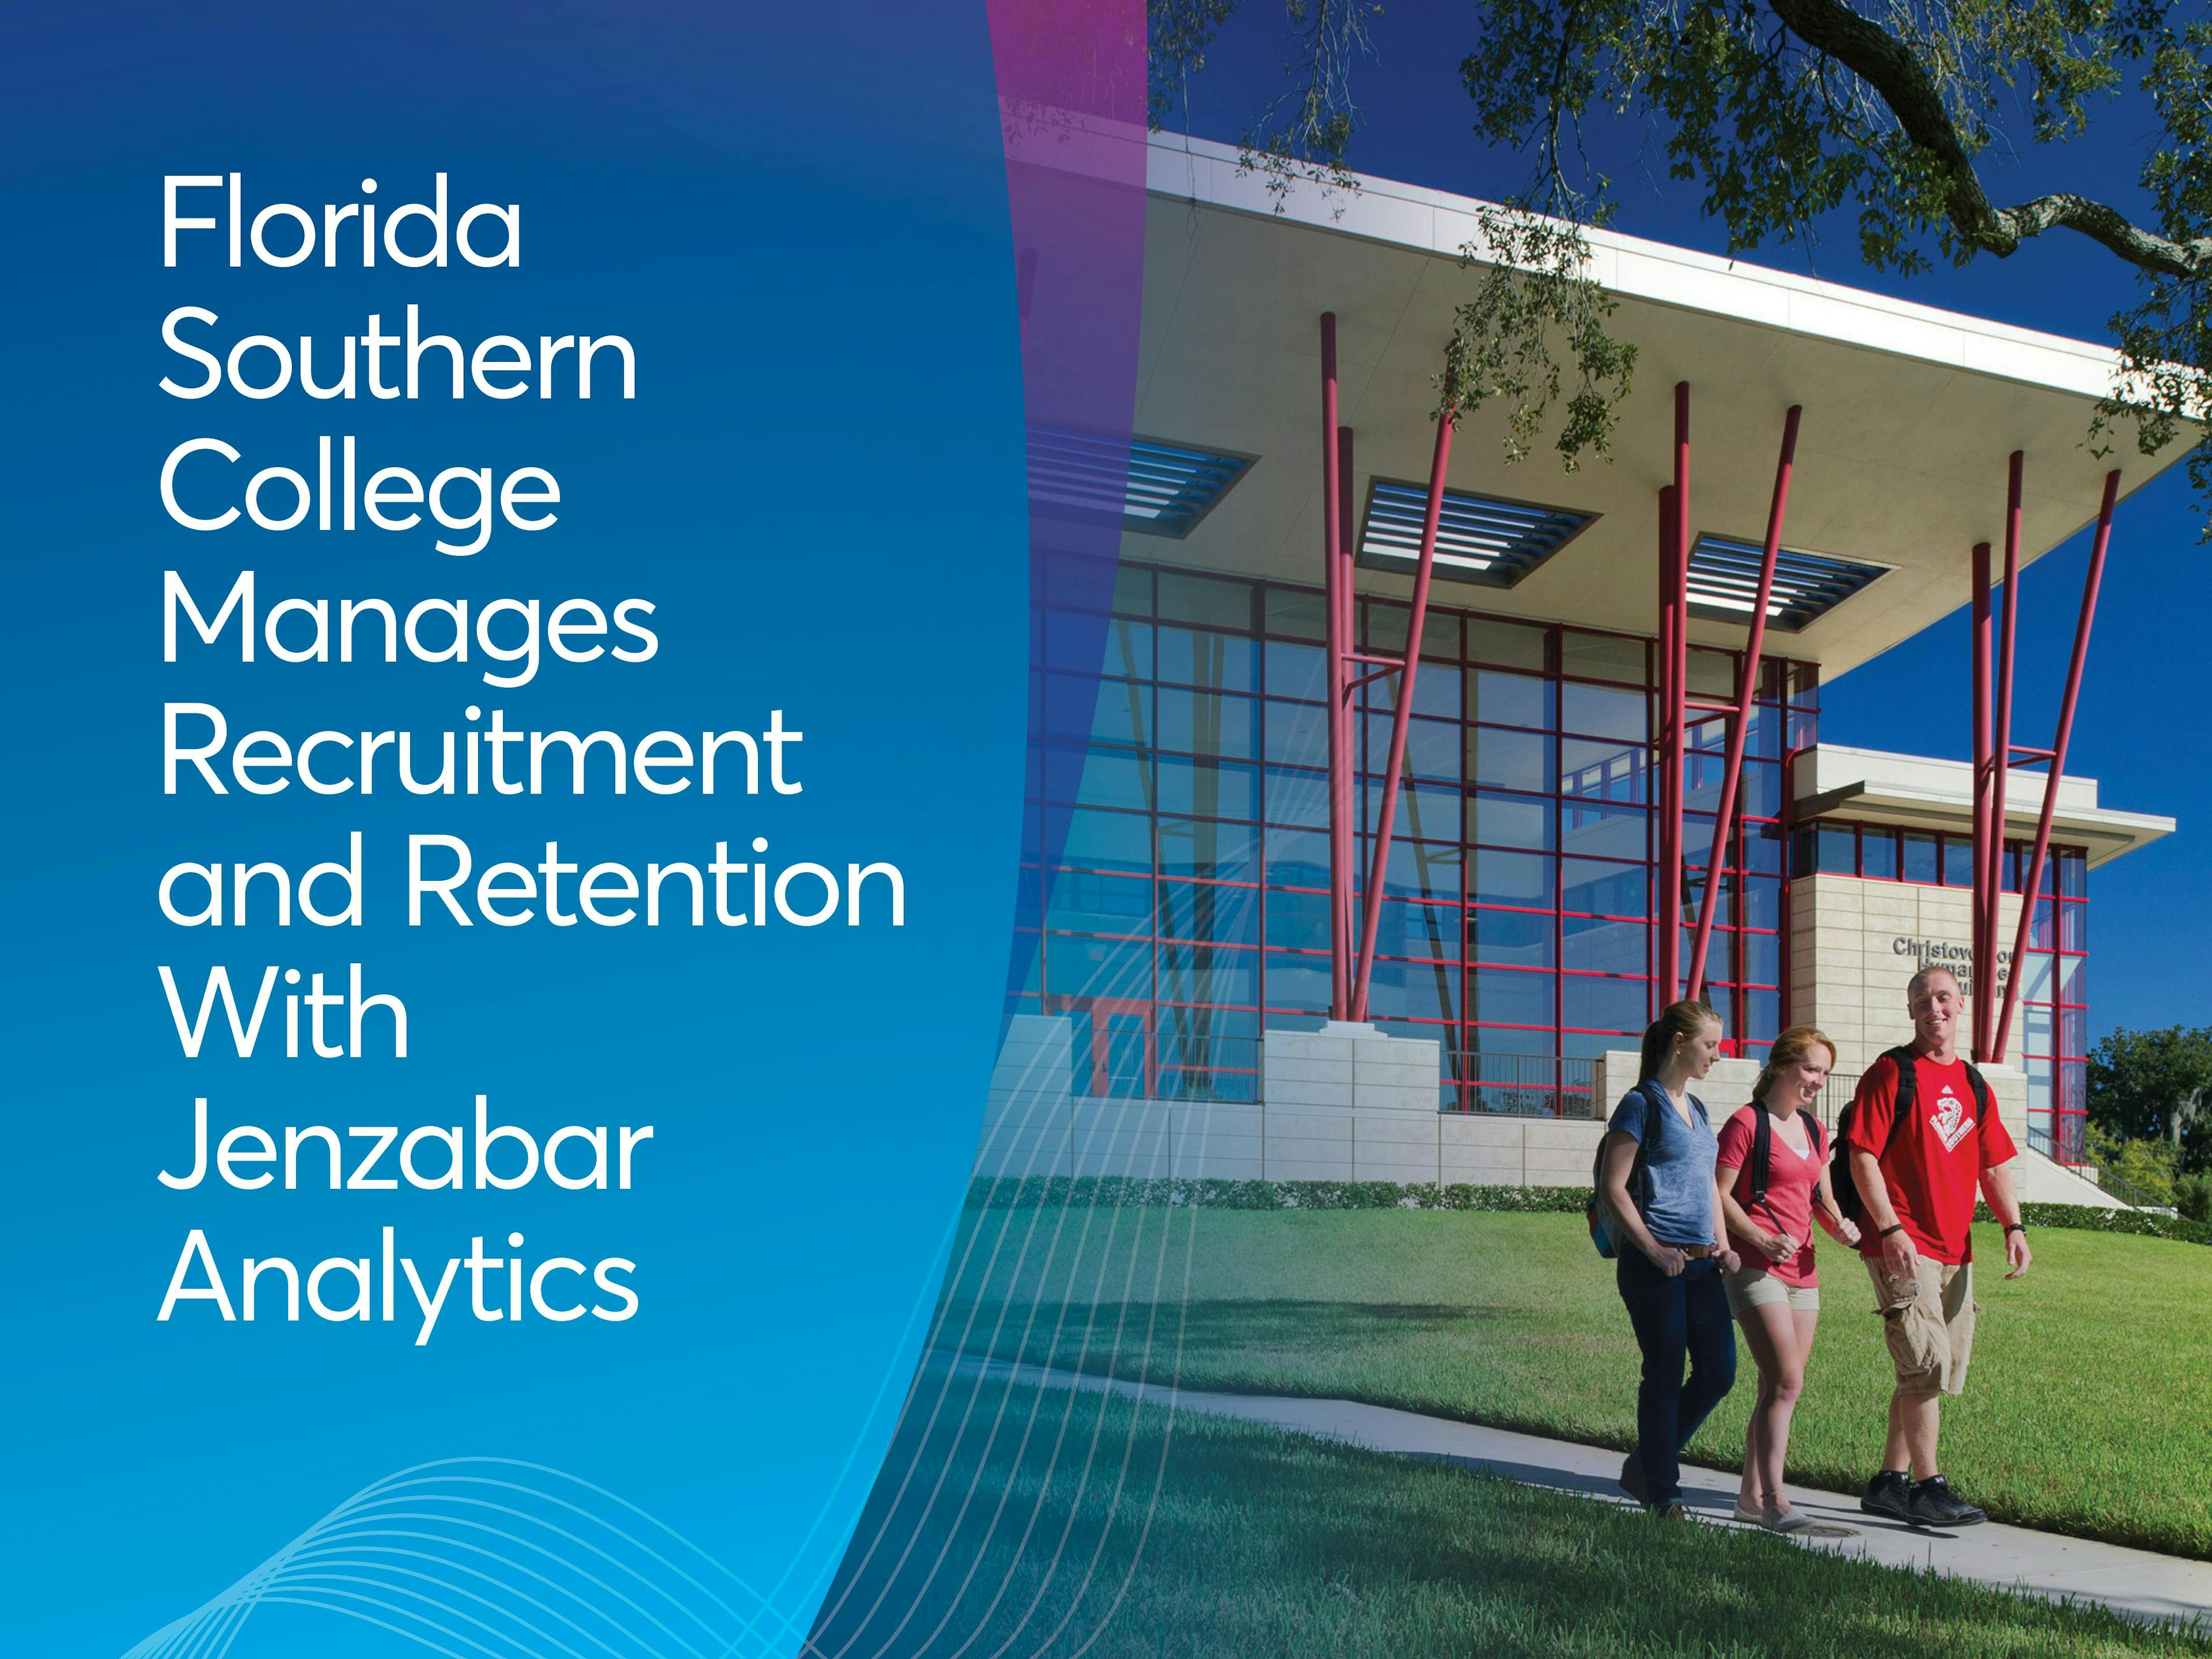 Florida Southern College Manages Recruitment and Retention With Jenzabar Analytics